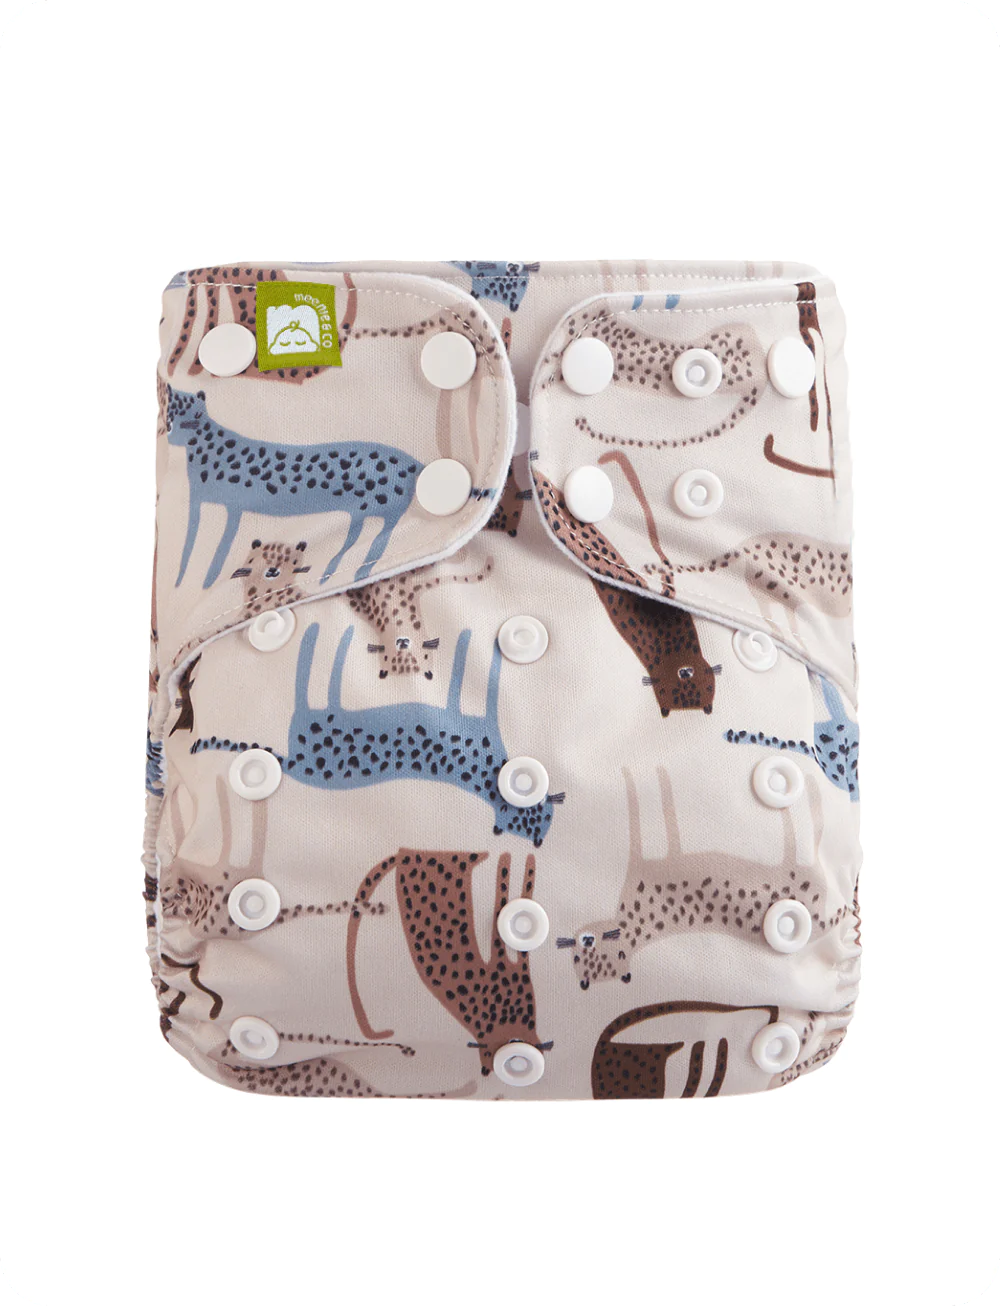 Meenie & Co. Single Gusset Cloth Diaper with Microfiber Reusable Insert